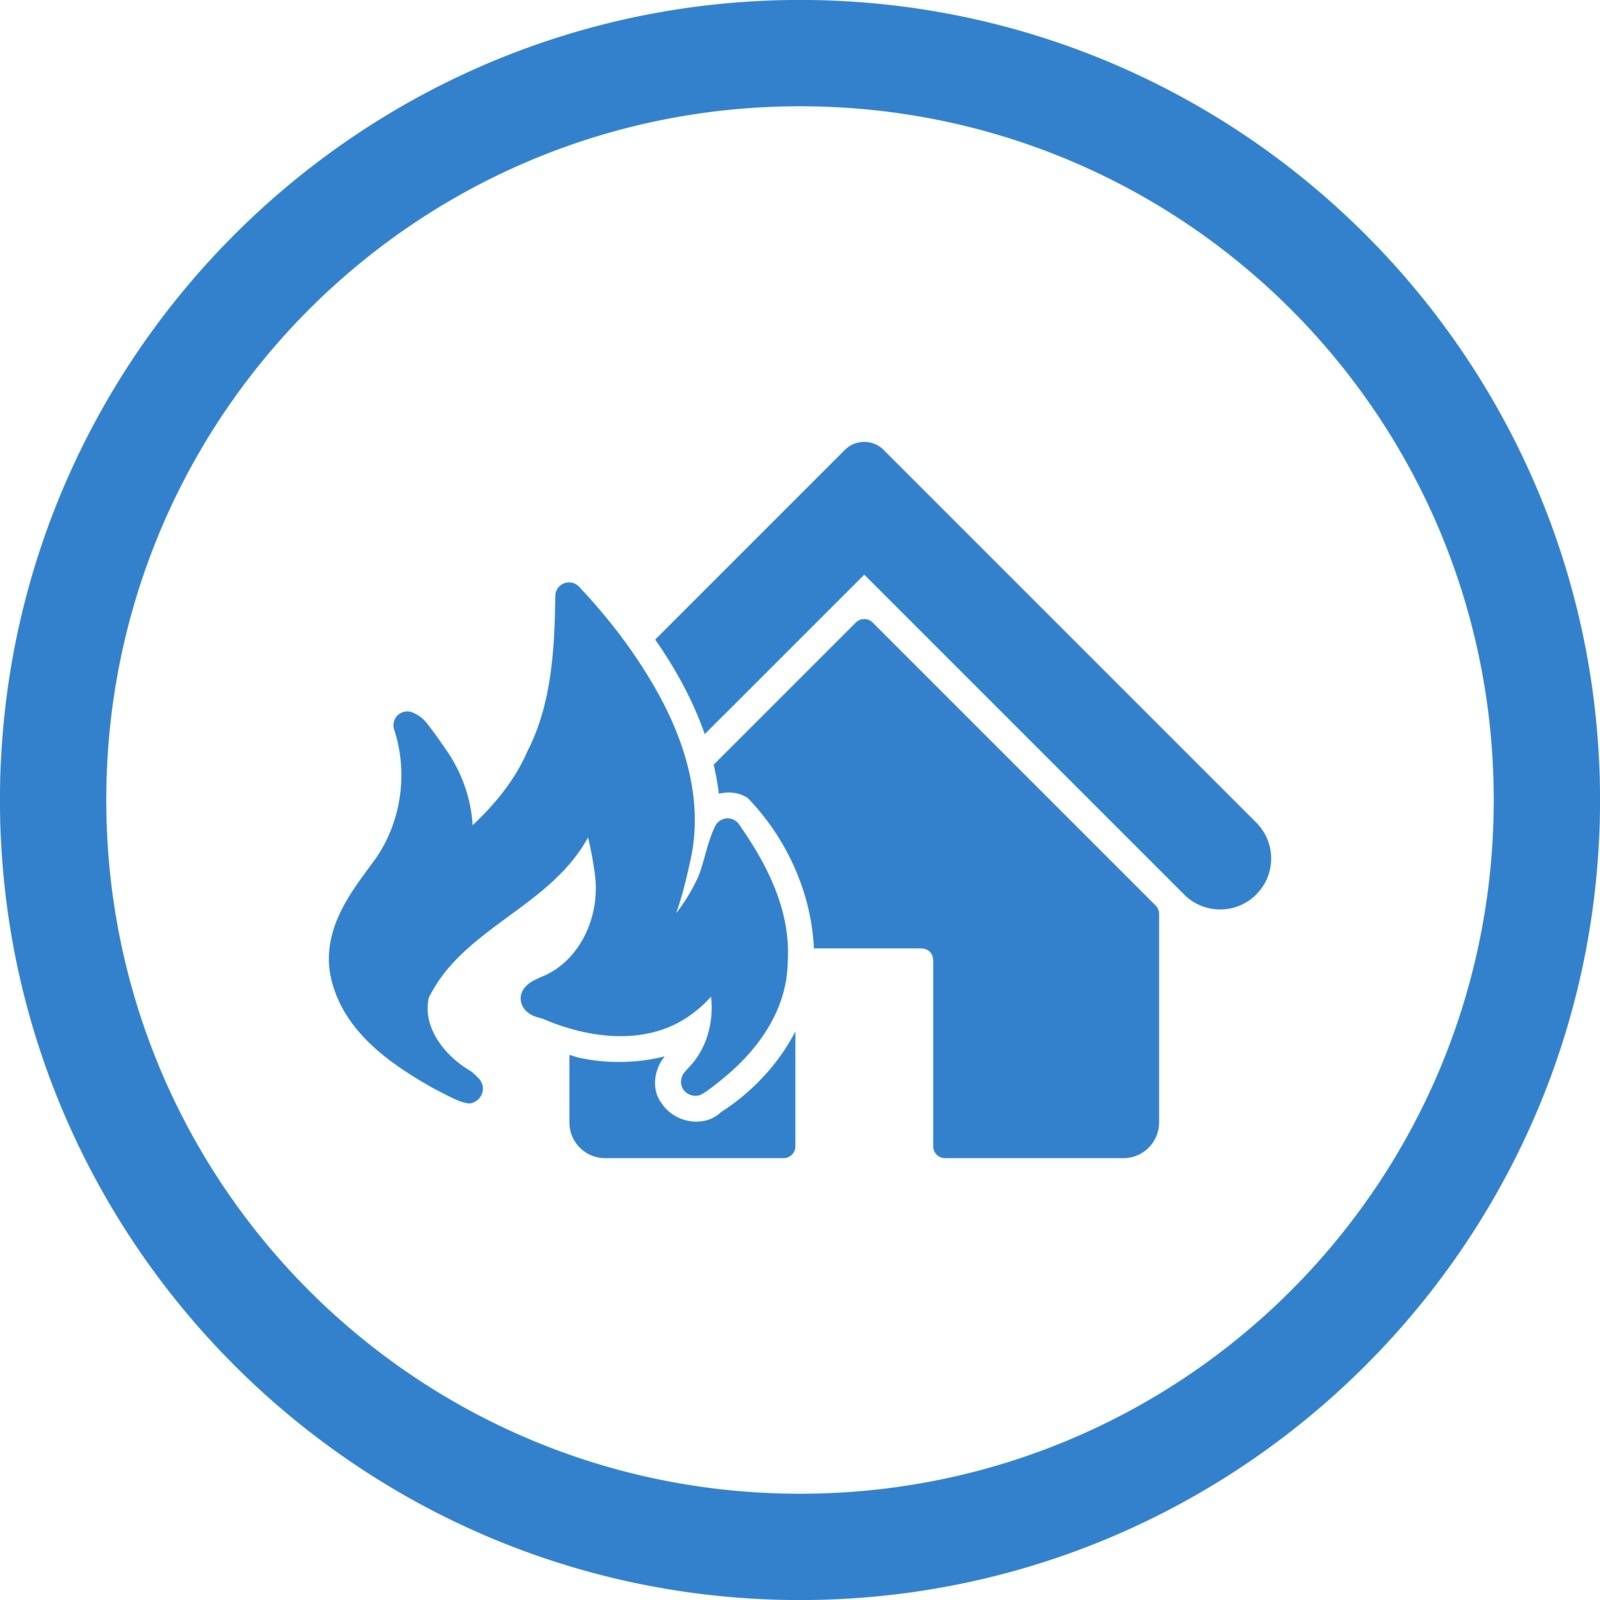 Fire Damage vector icon. This flat rounded symbol uses cobalt color and isolated on a white background.